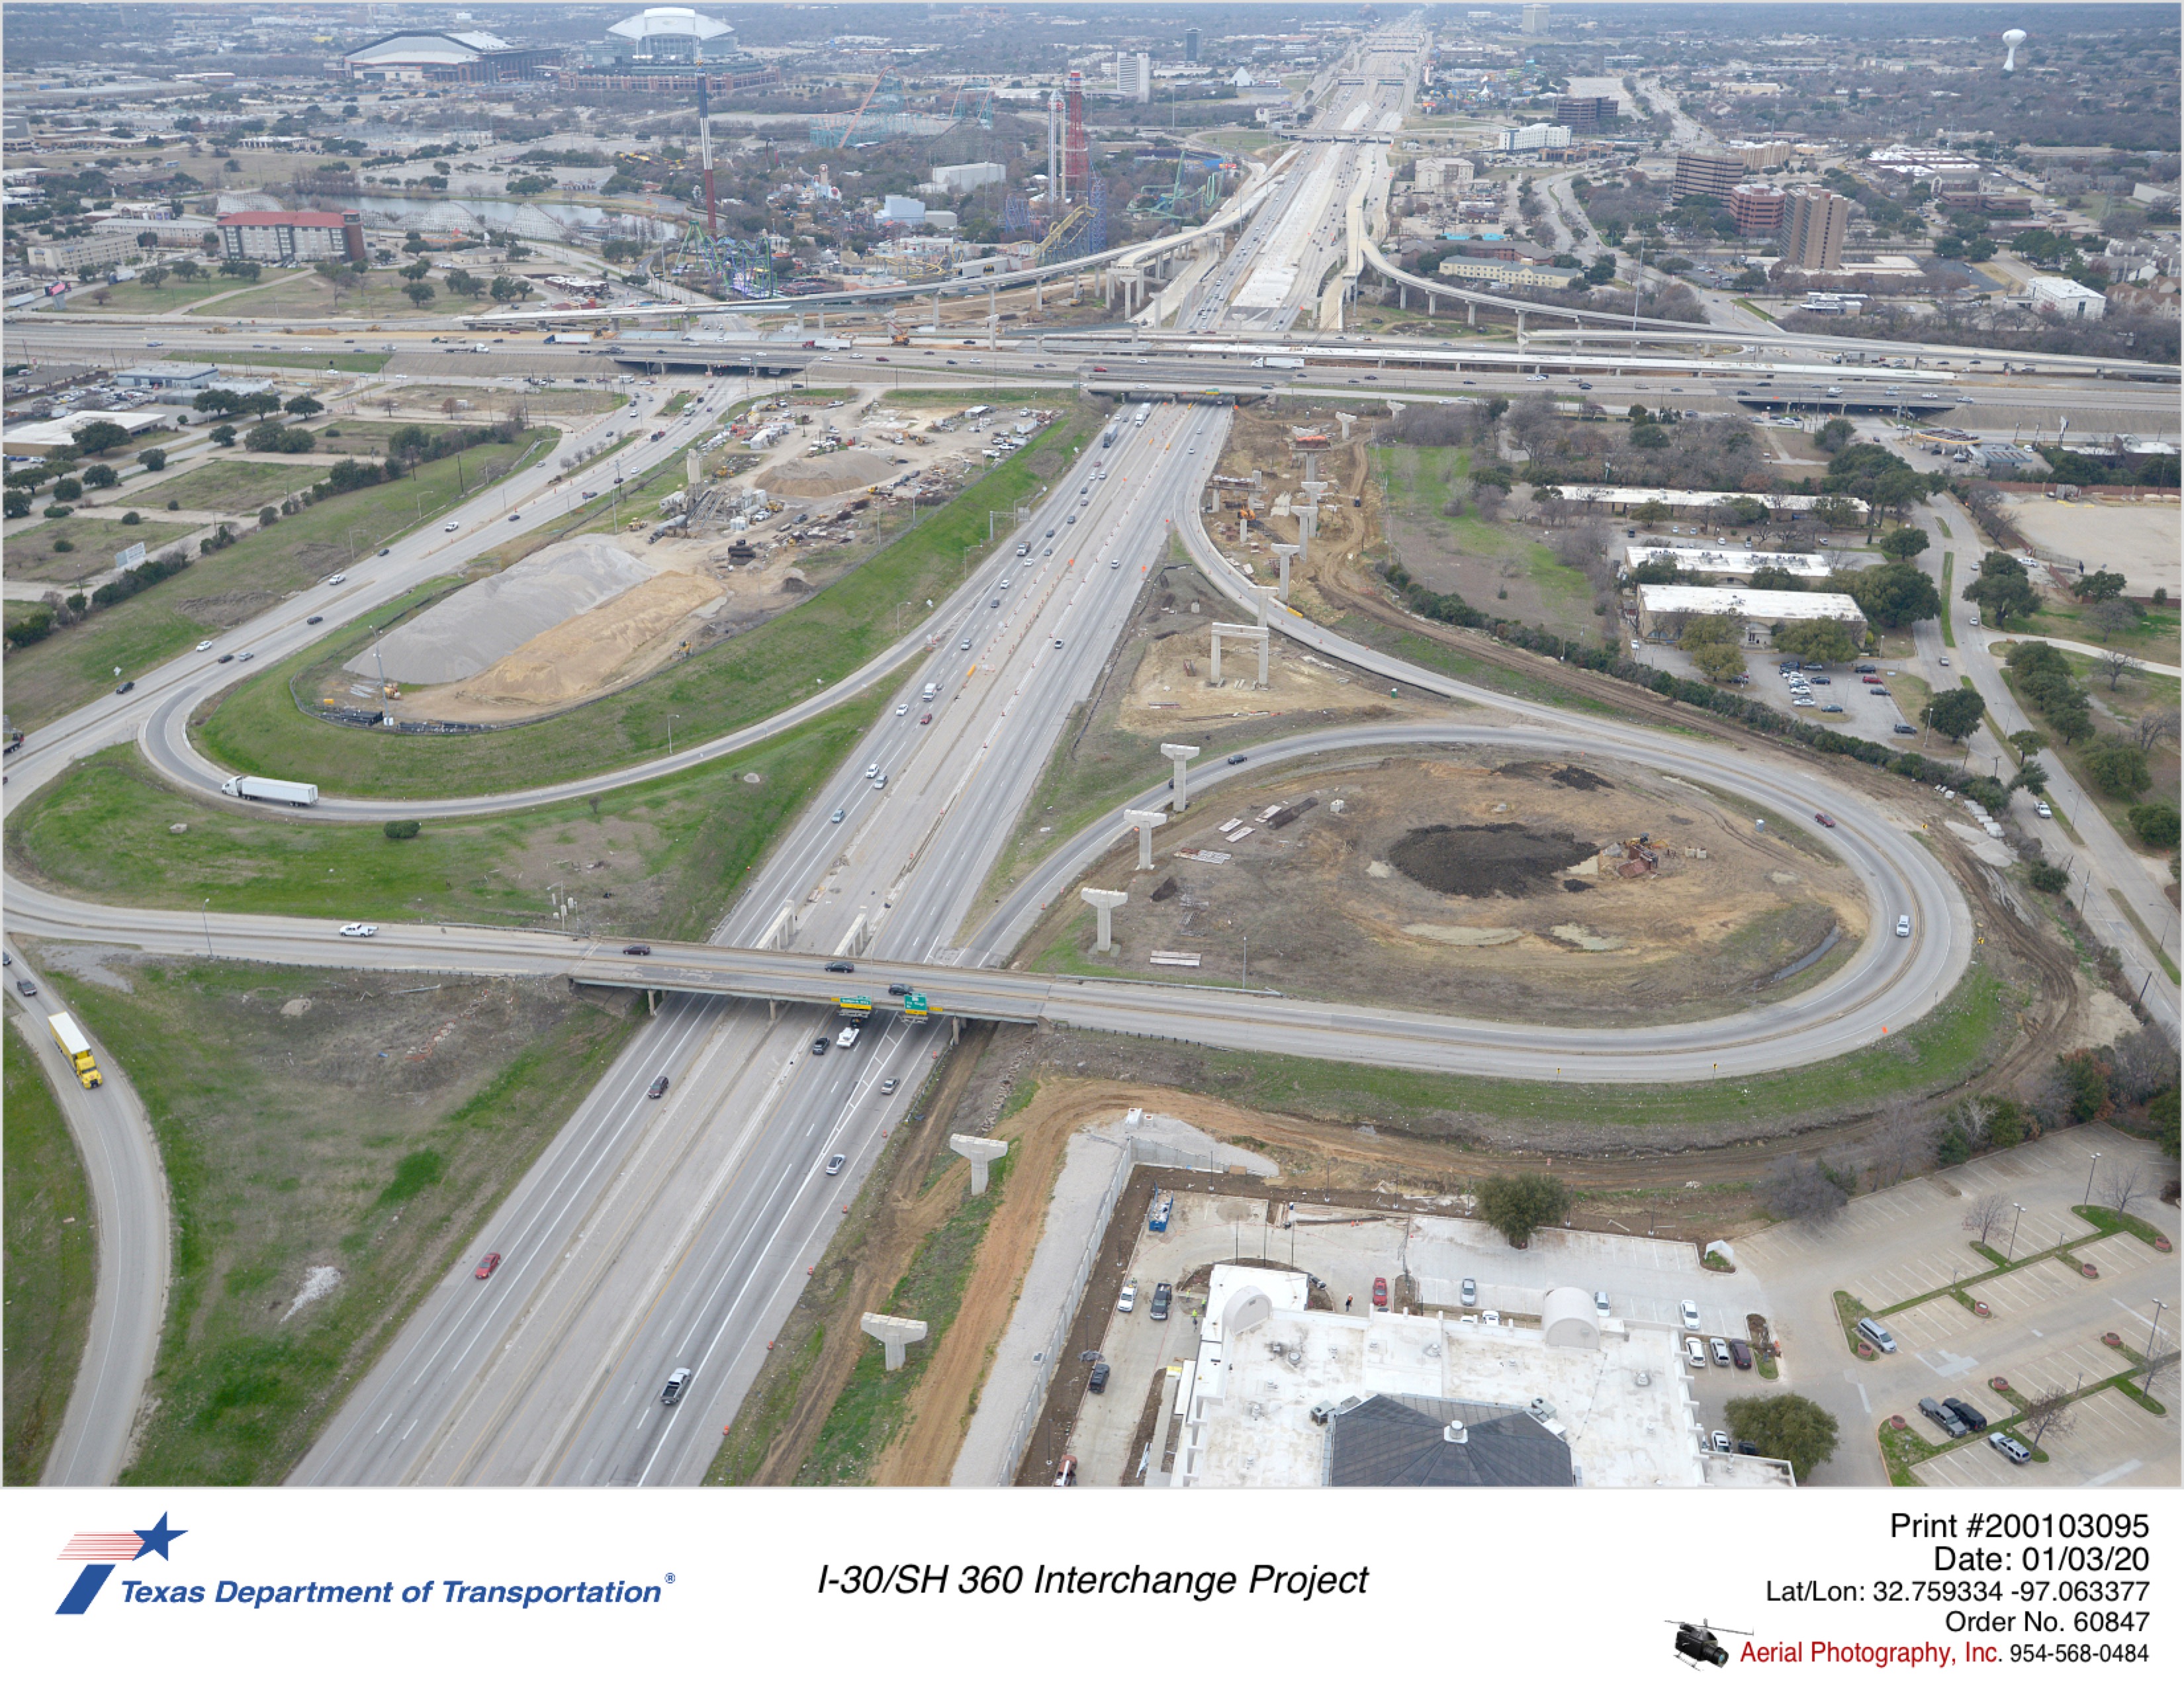 I-30 looking west at I-30/SH 360 interchange. Construction of westbound direct connector substructures is shown on north side of I-30.